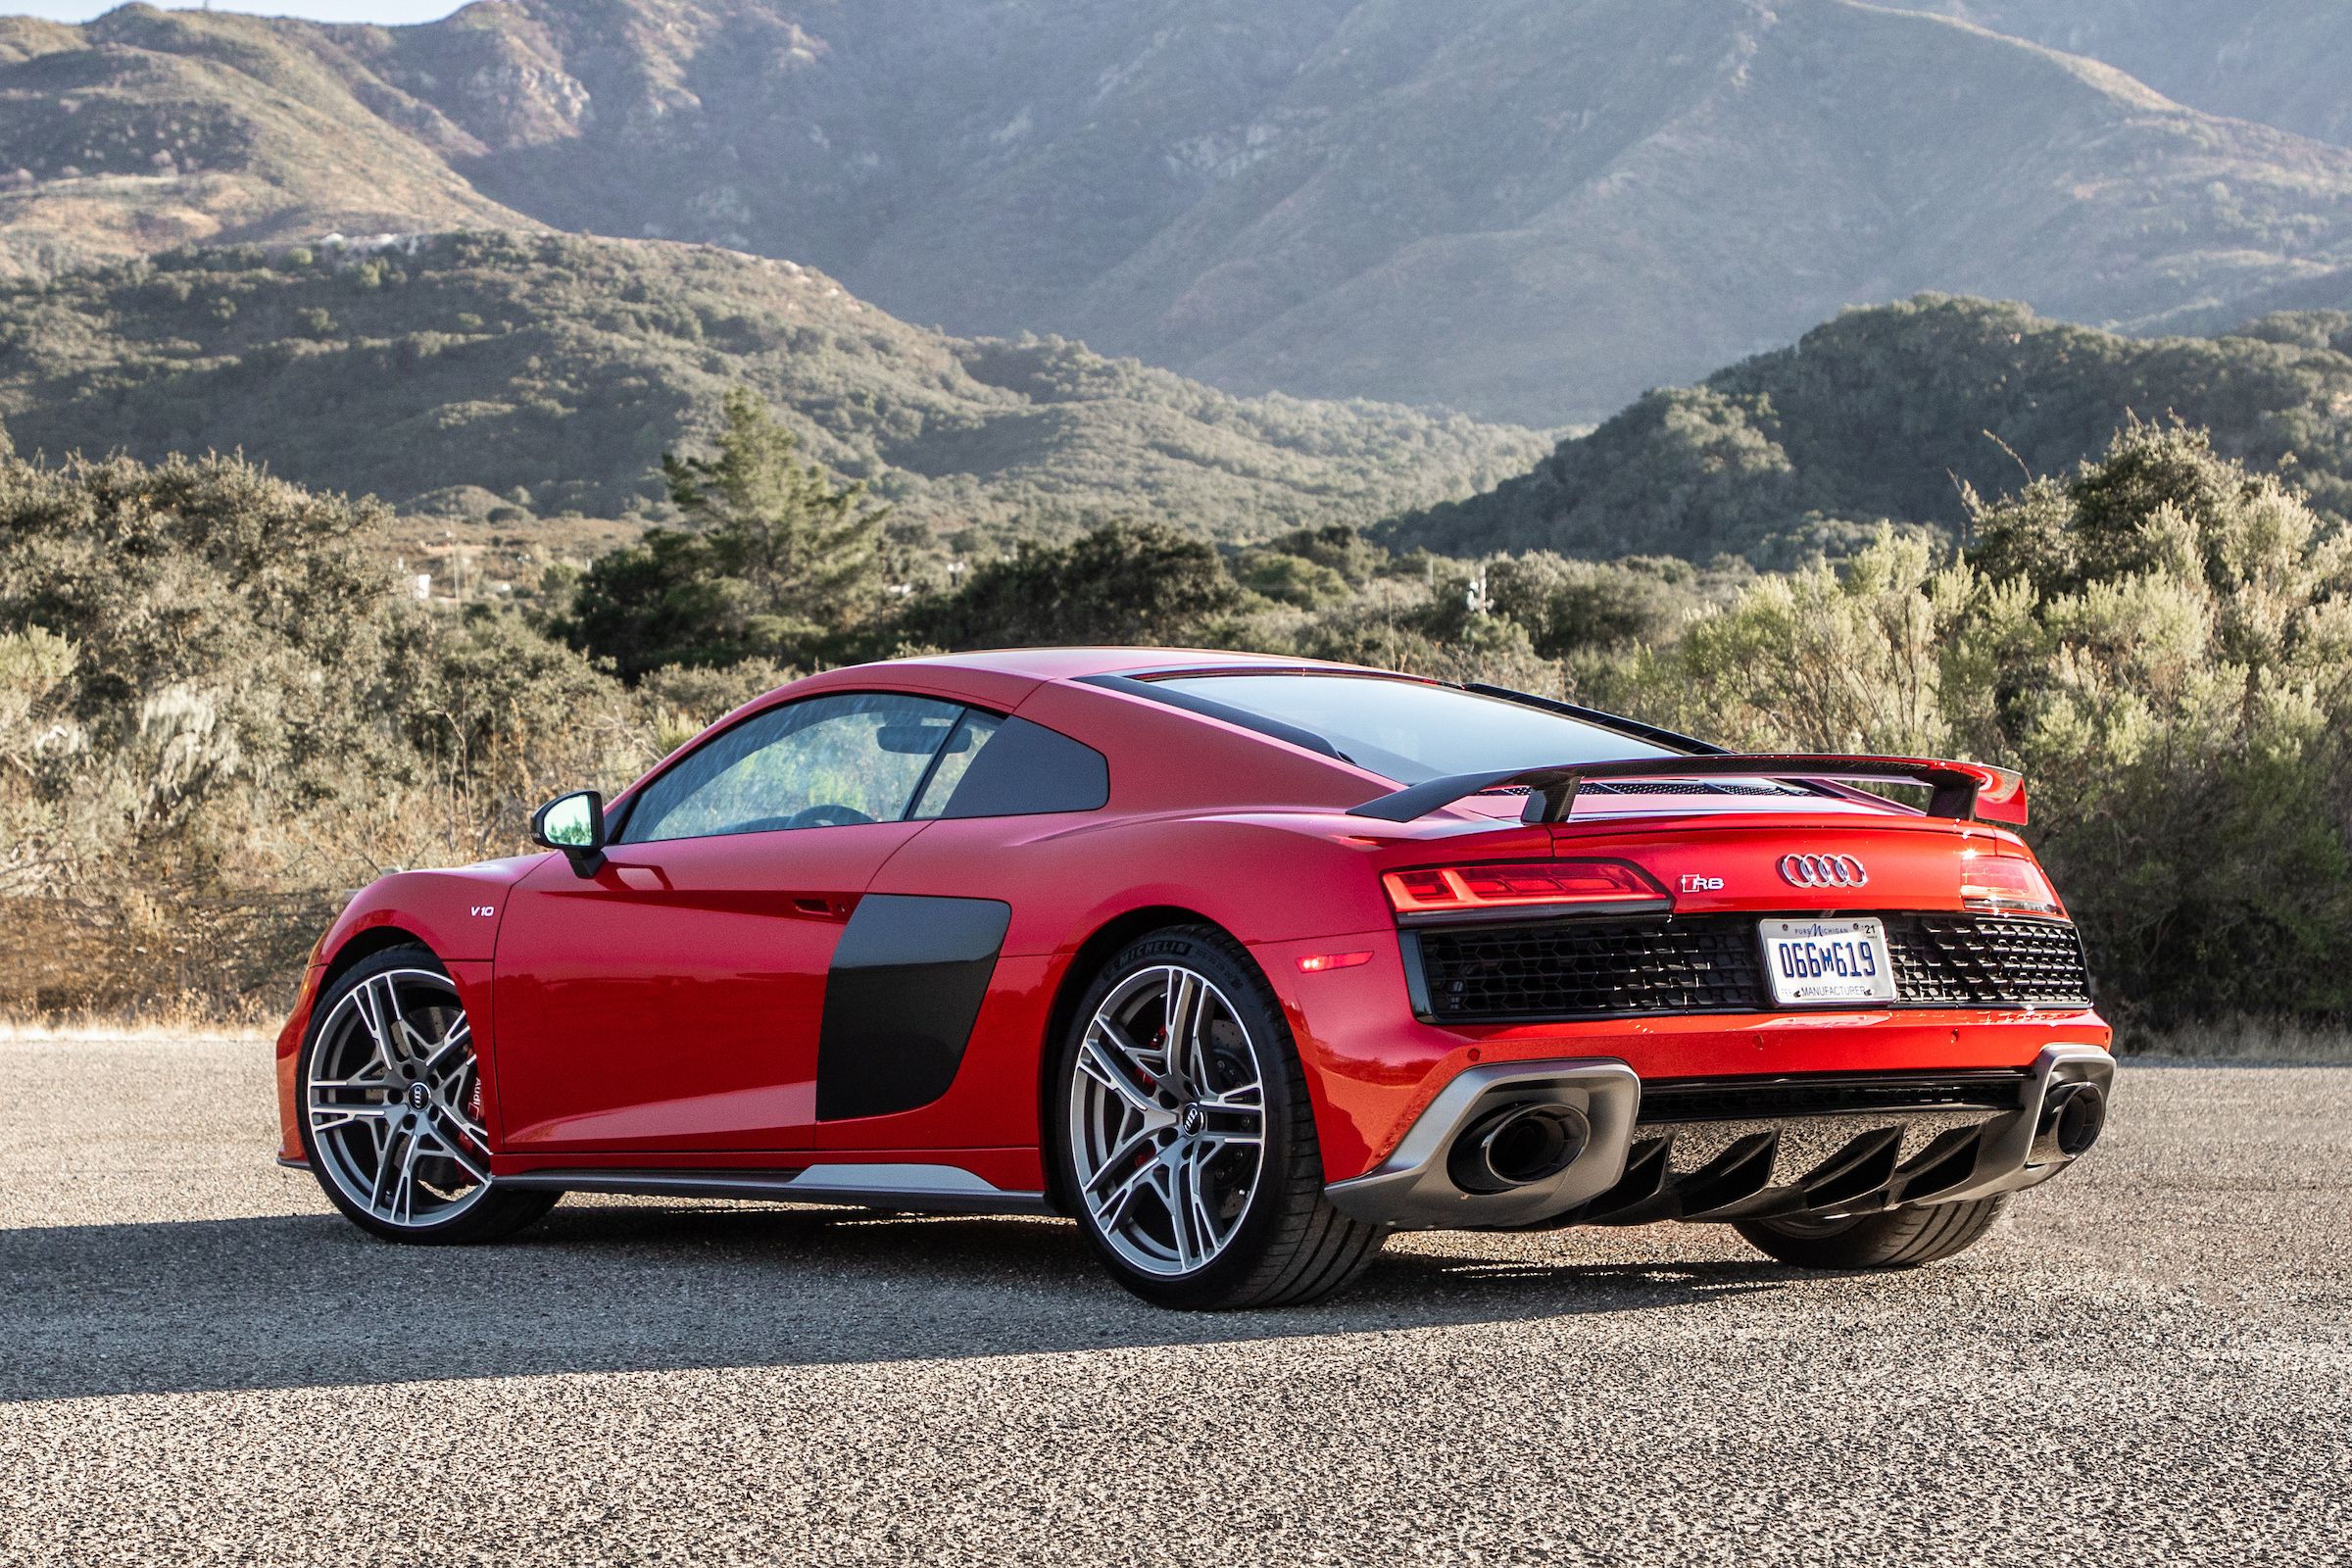 The Audi R8 Is Refreshed for 2020, But It's Still a Great Everyday Supercar